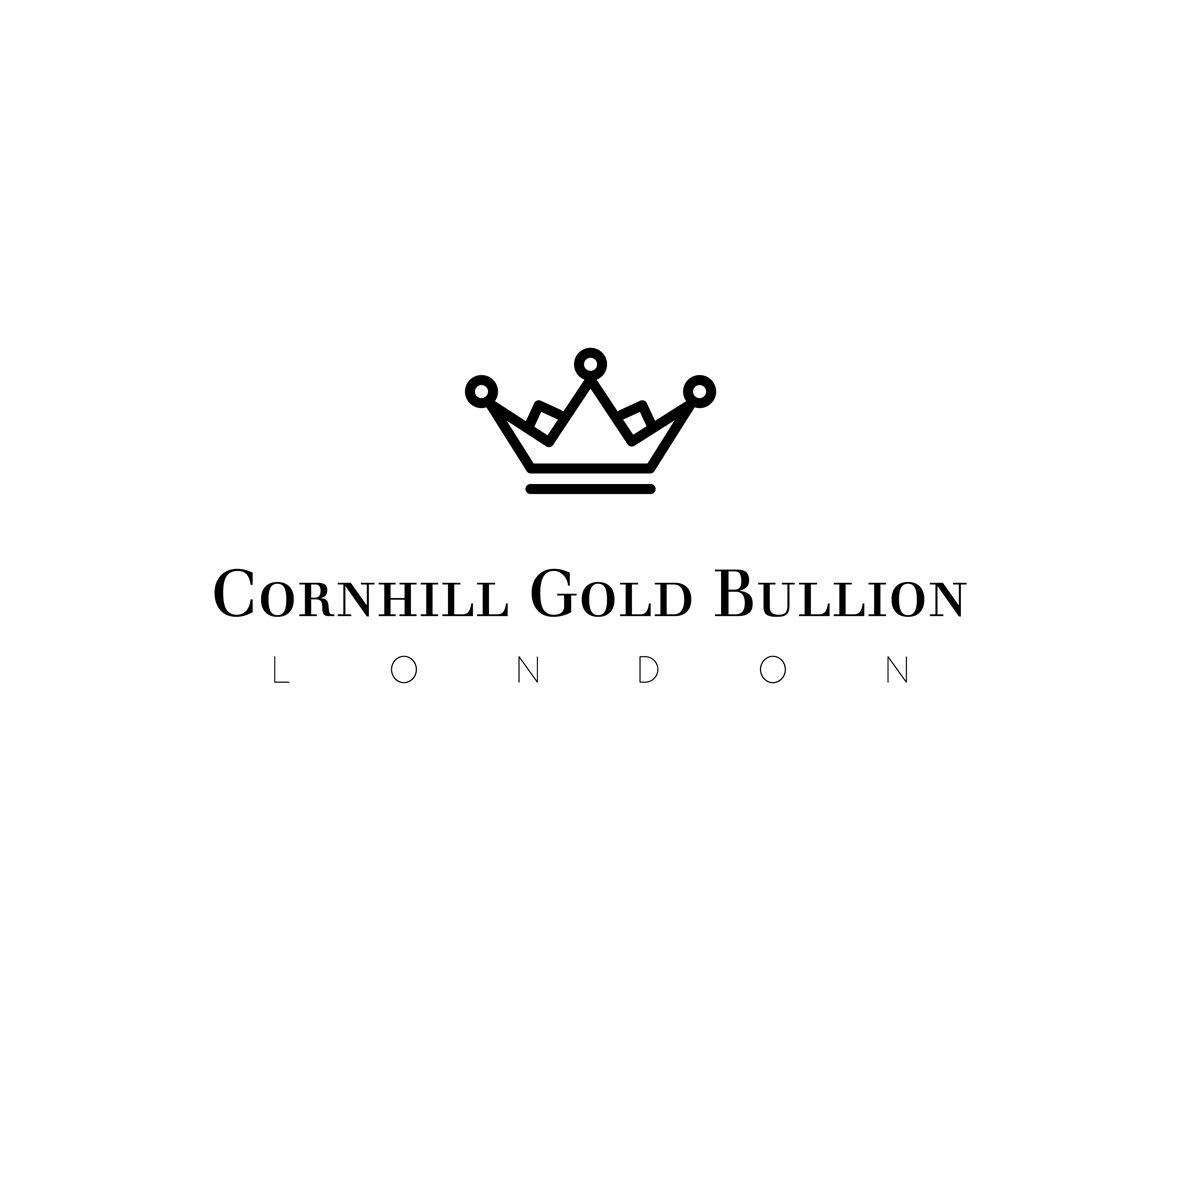 Gold Black and White Construction Logo - Construction Logo Design for Cornhill Gold Bullion (with the option ...